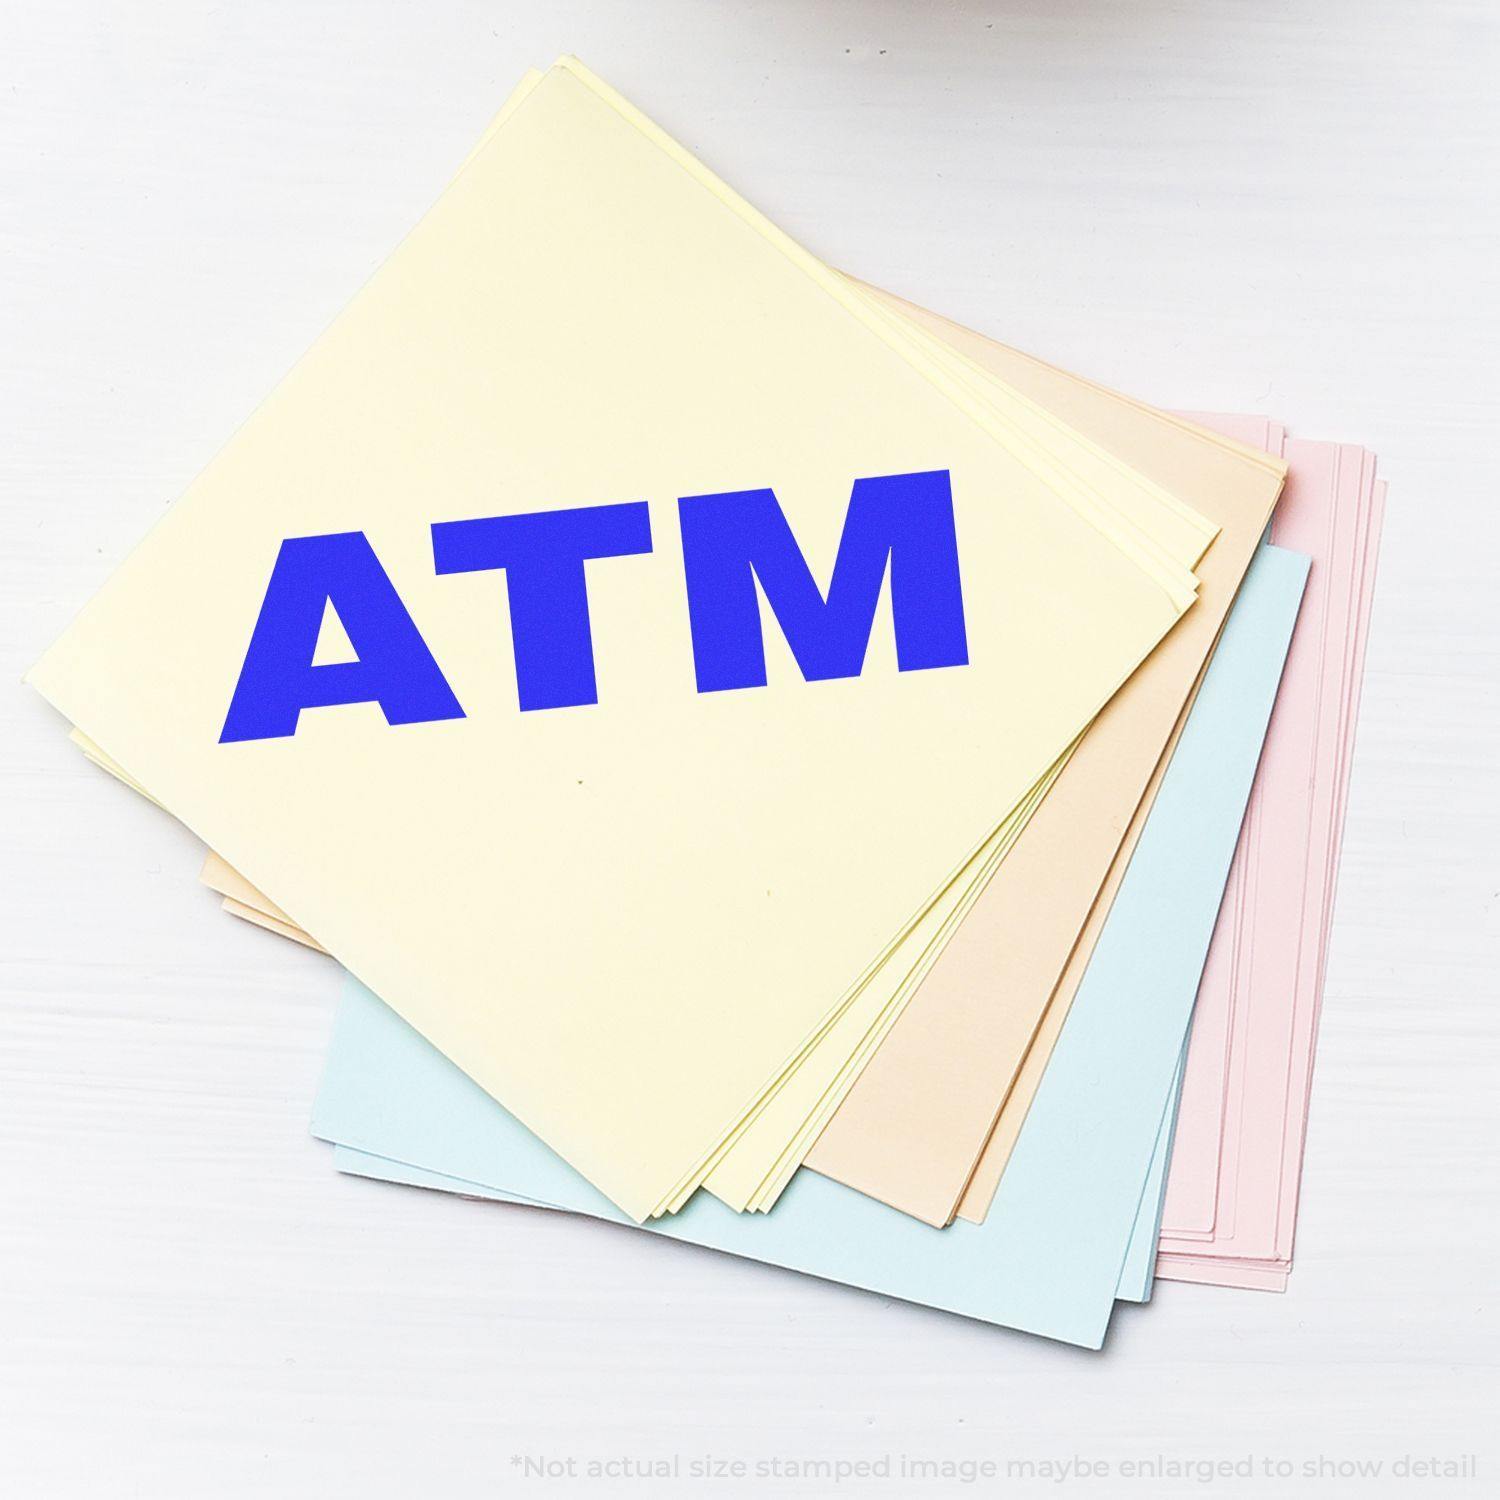 A stock office pre-inked stamp with a stamped image showing how the text "ATM" is displayed after stamping.